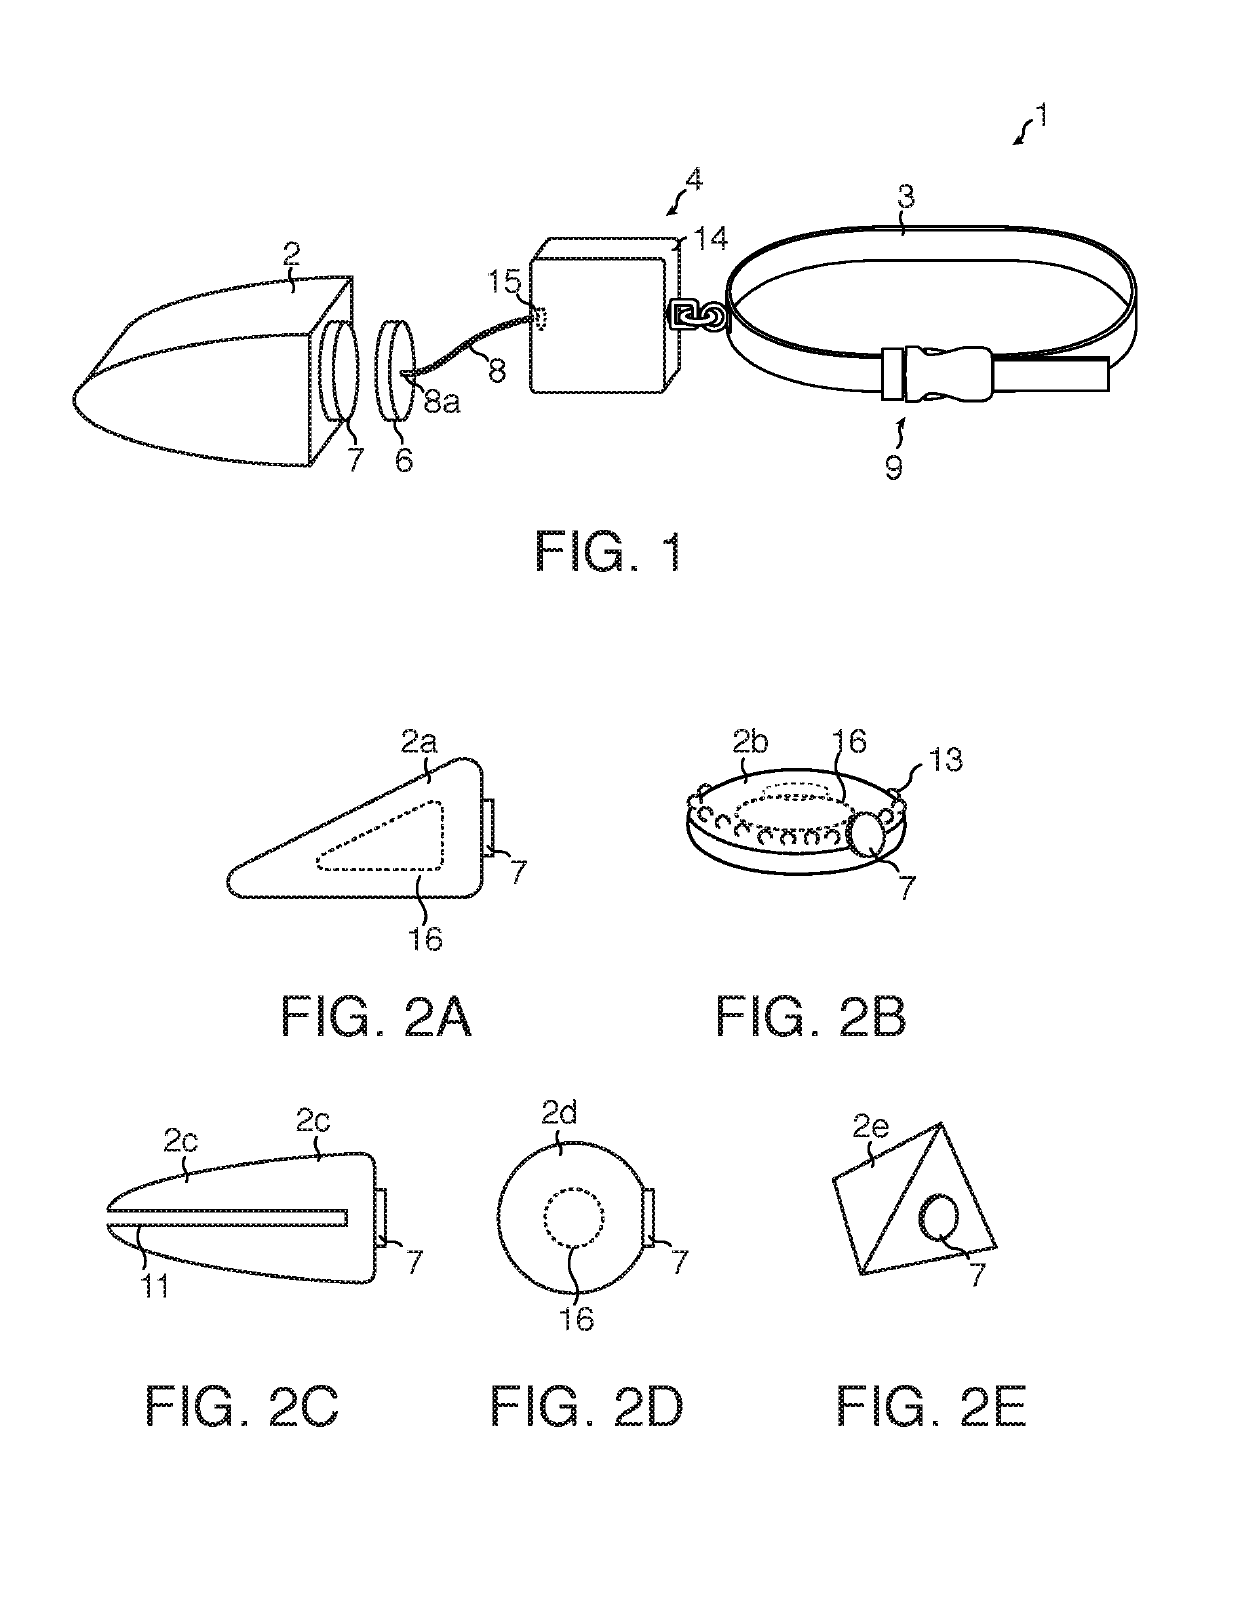 Slip prevention apparatus and method for snow equipment